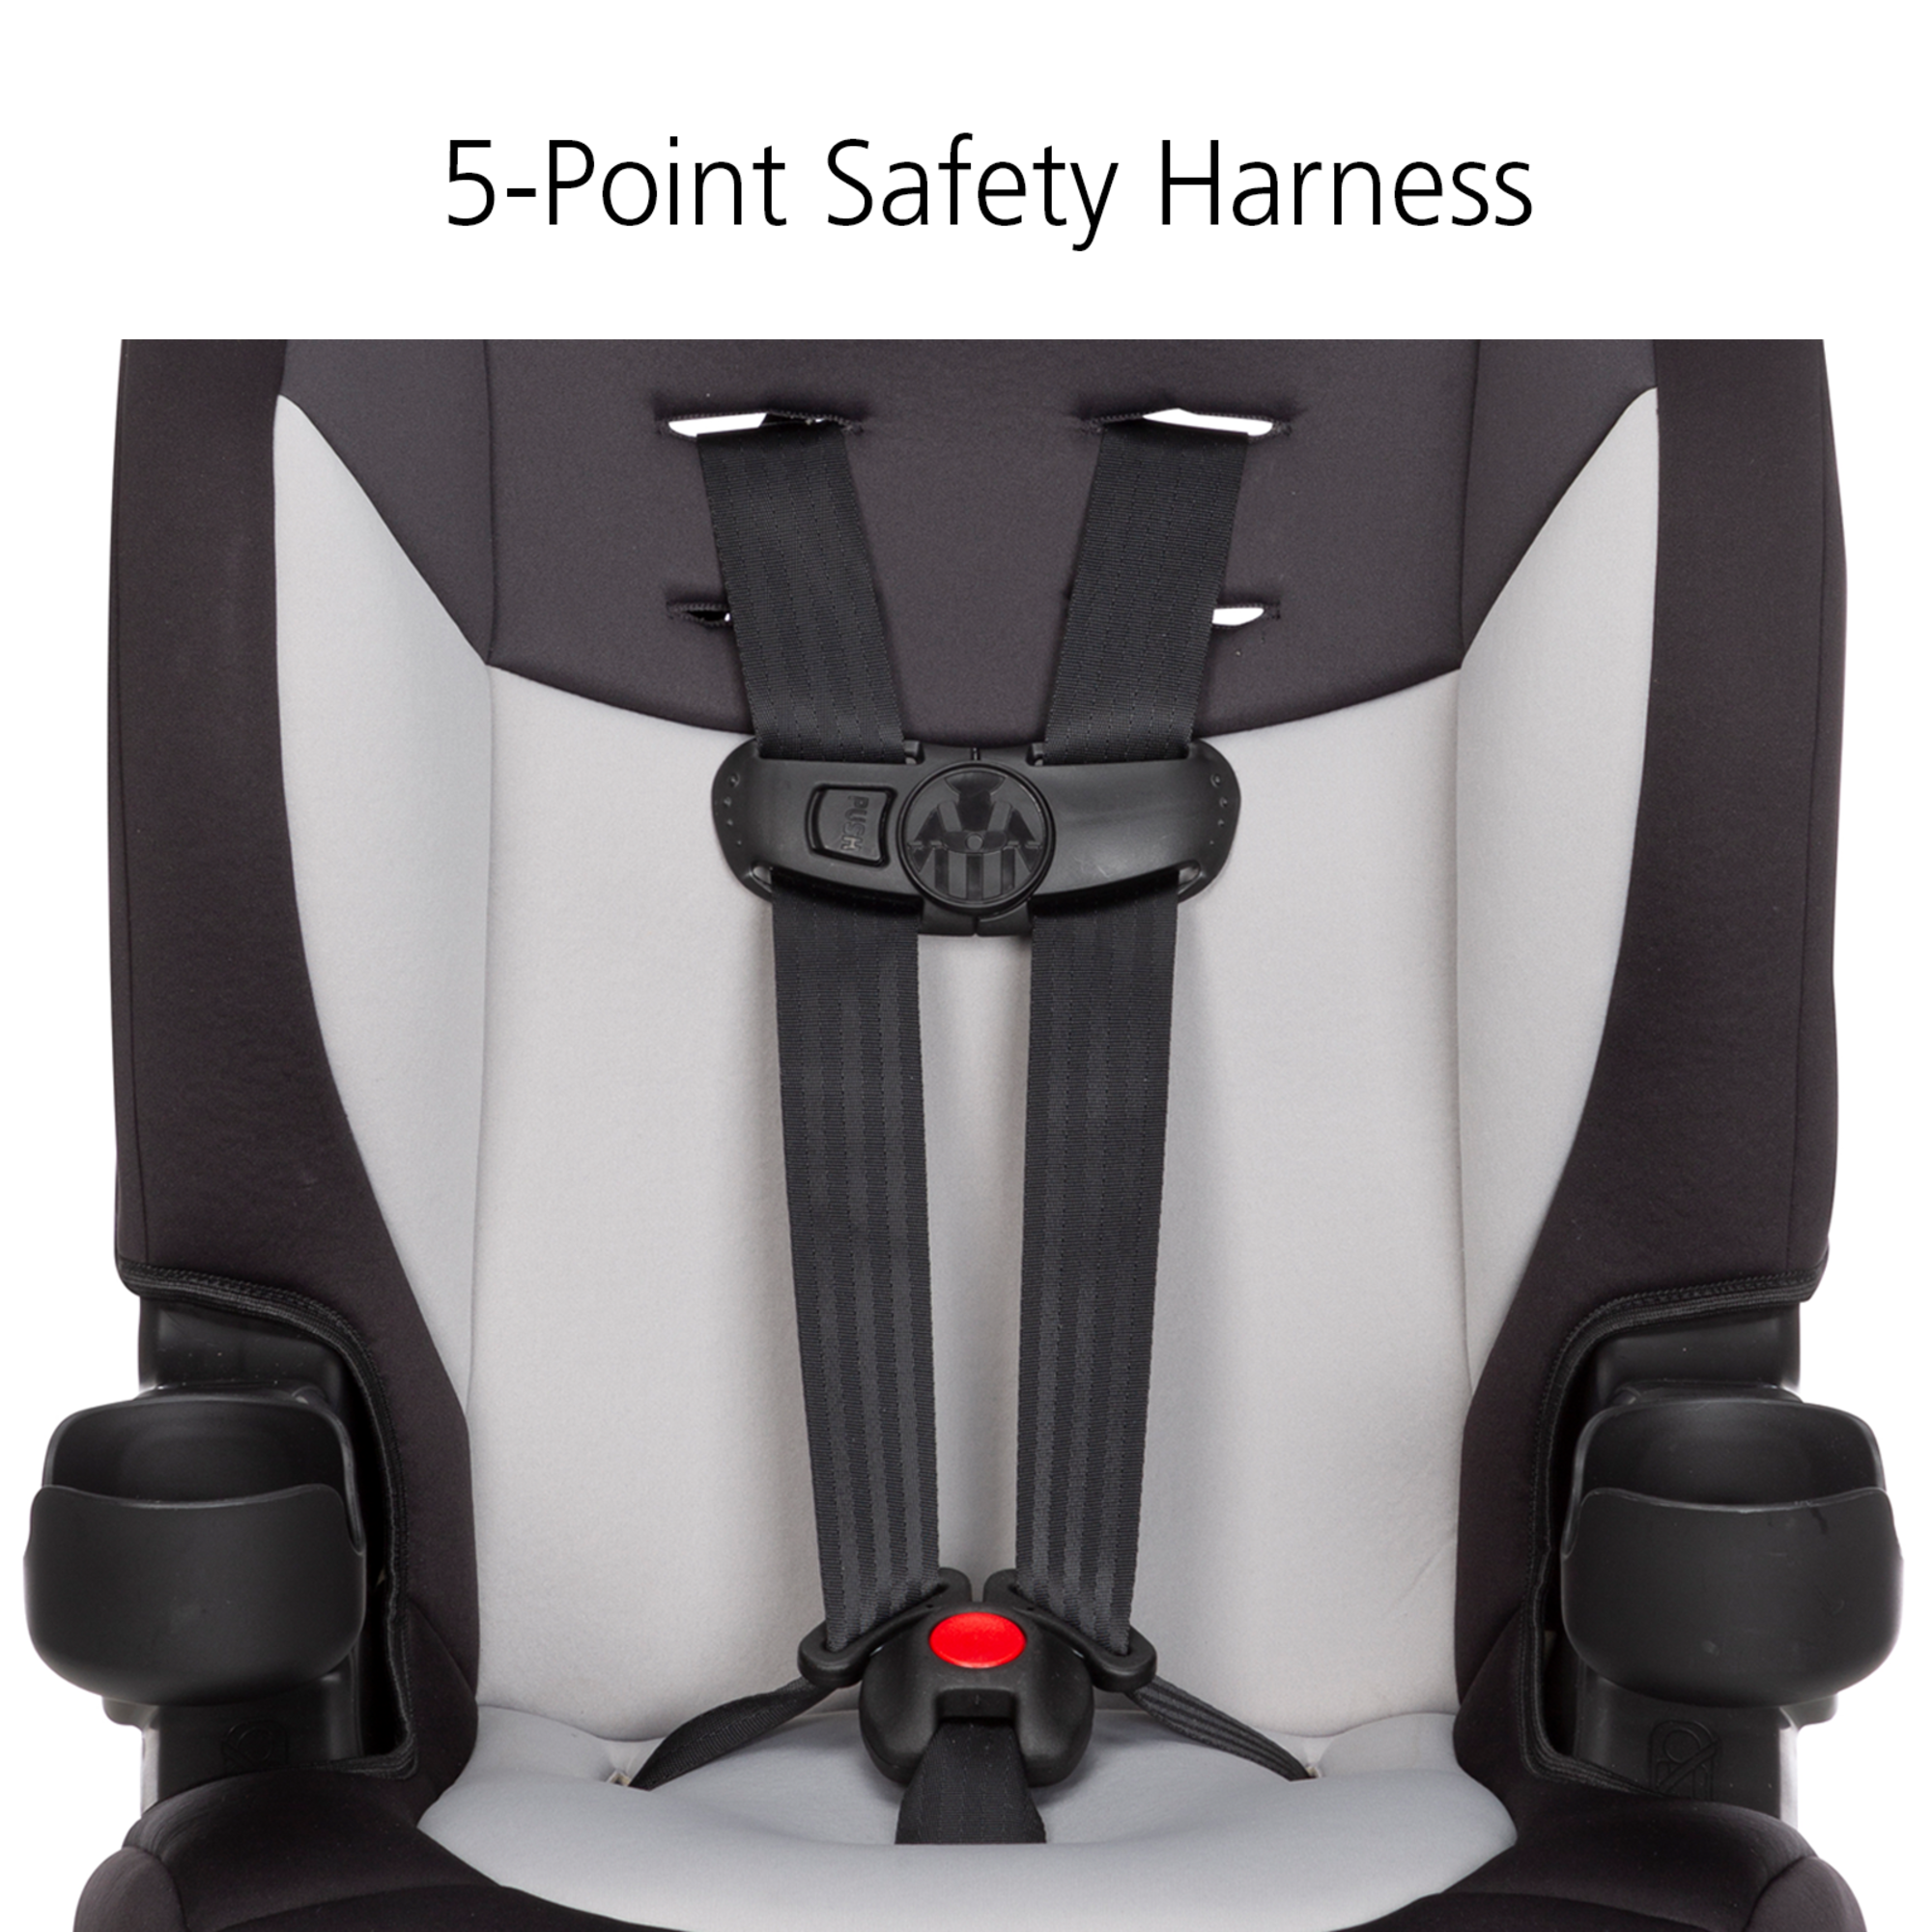 5-Point Safety Harness